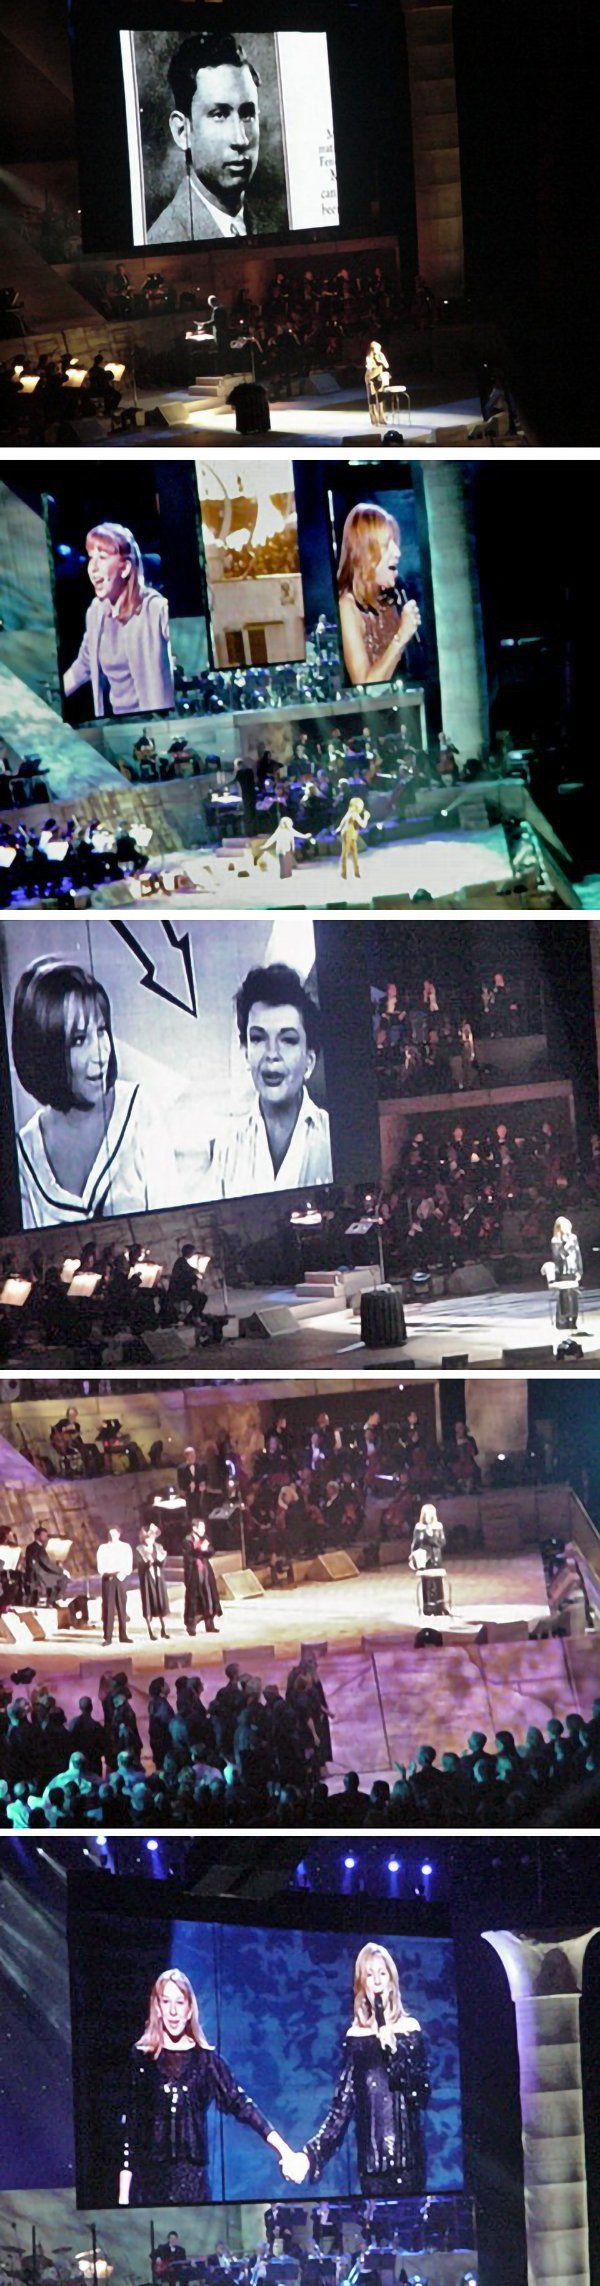 Fan photographs of the last Madison Square Garden show.